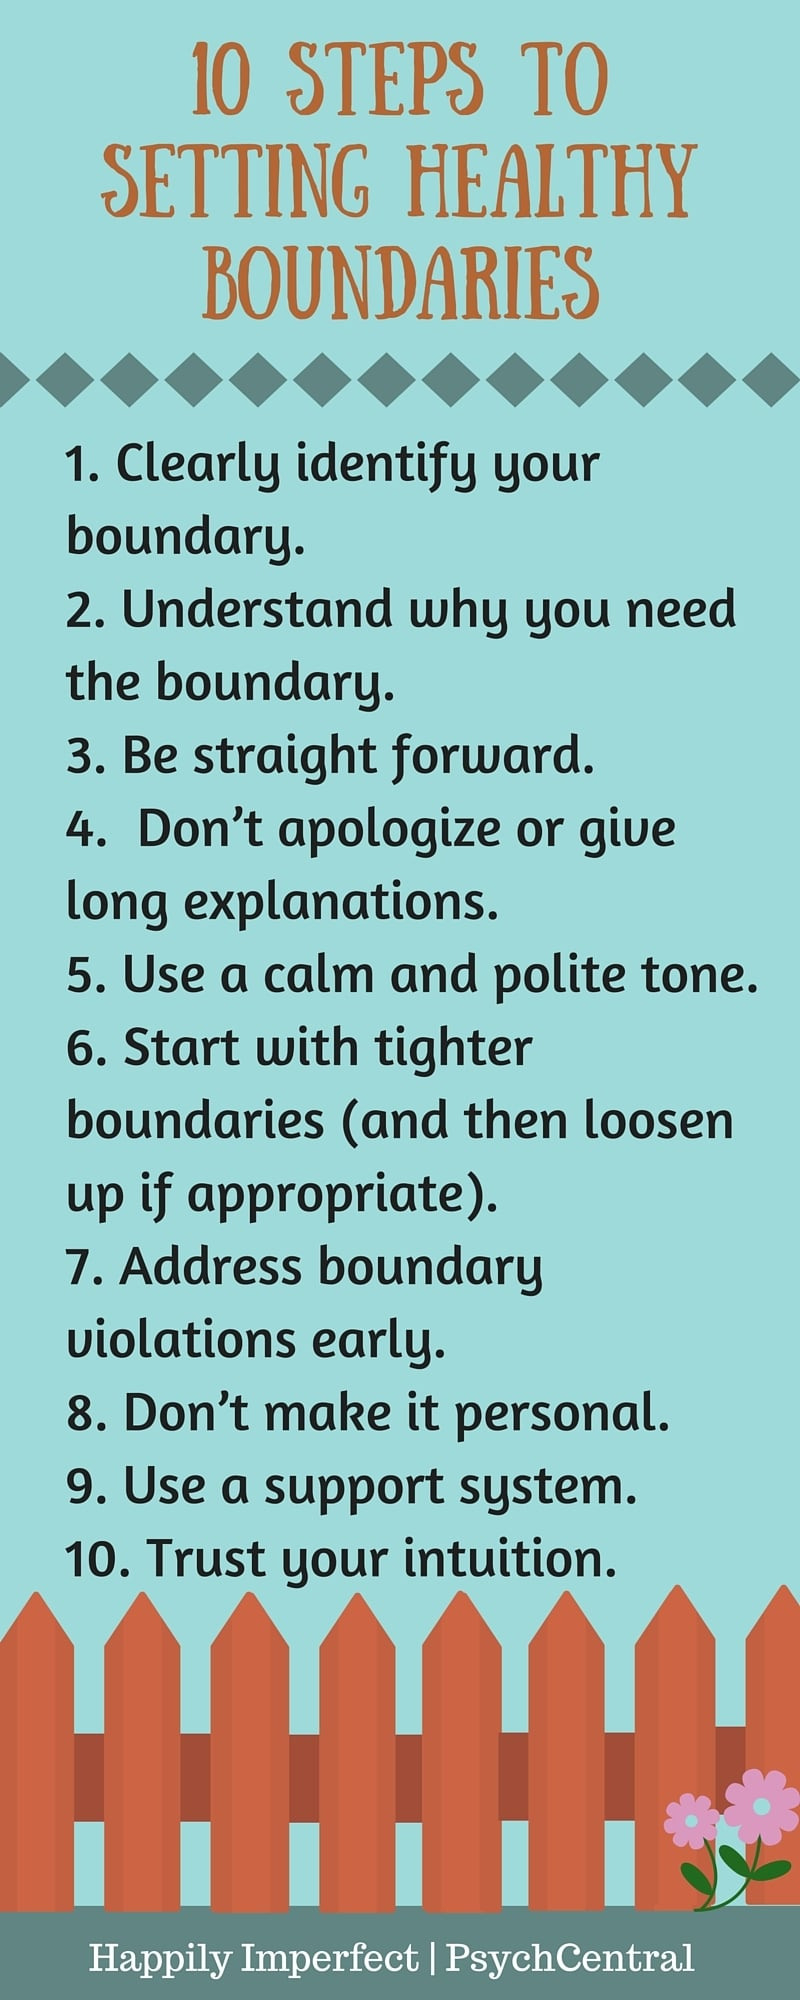 10 Steps To Setting Healthy Boundaries  H Imperfect